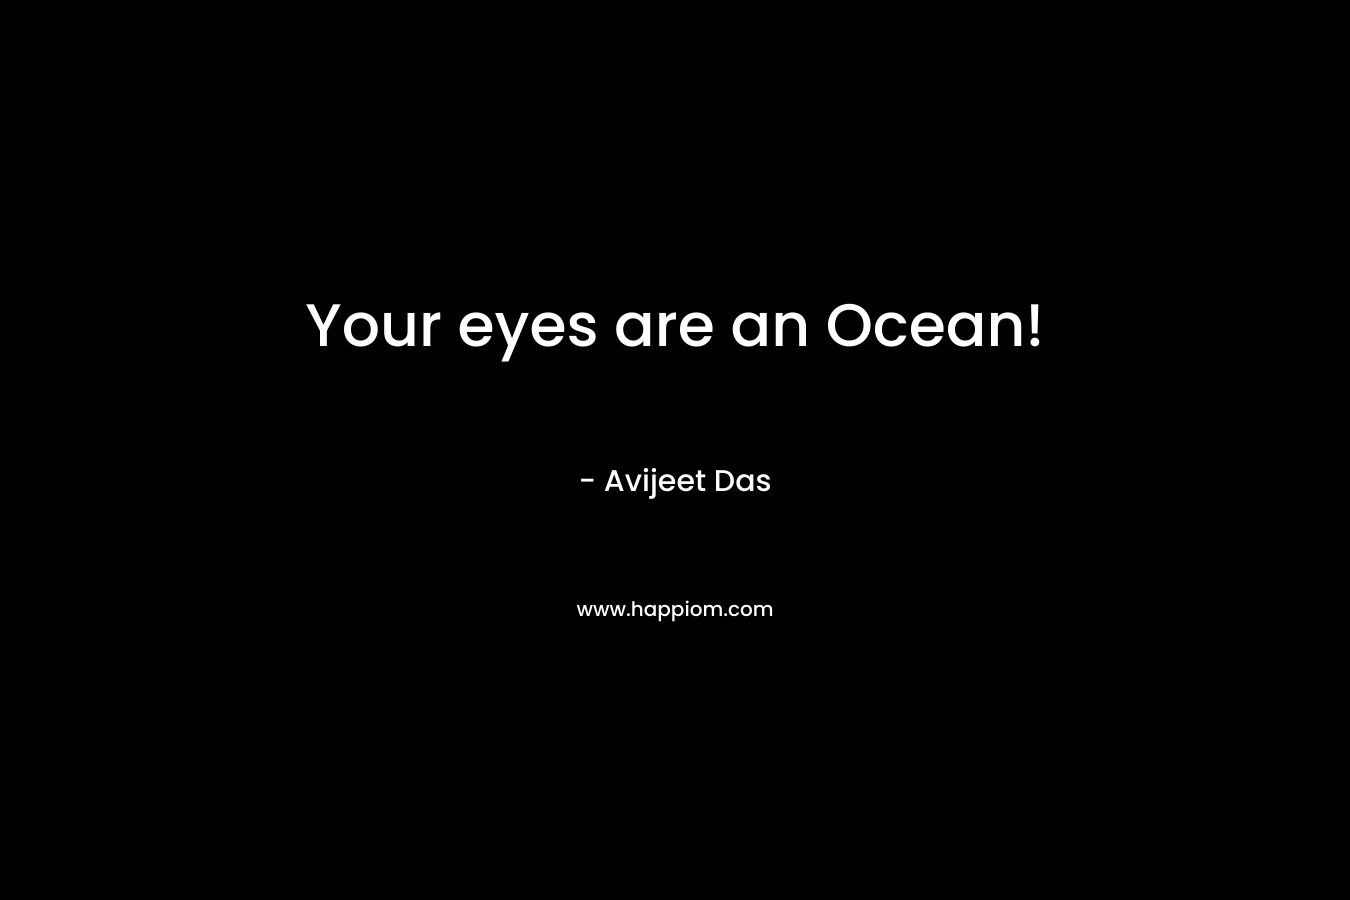 Your eyes are an Ocean!